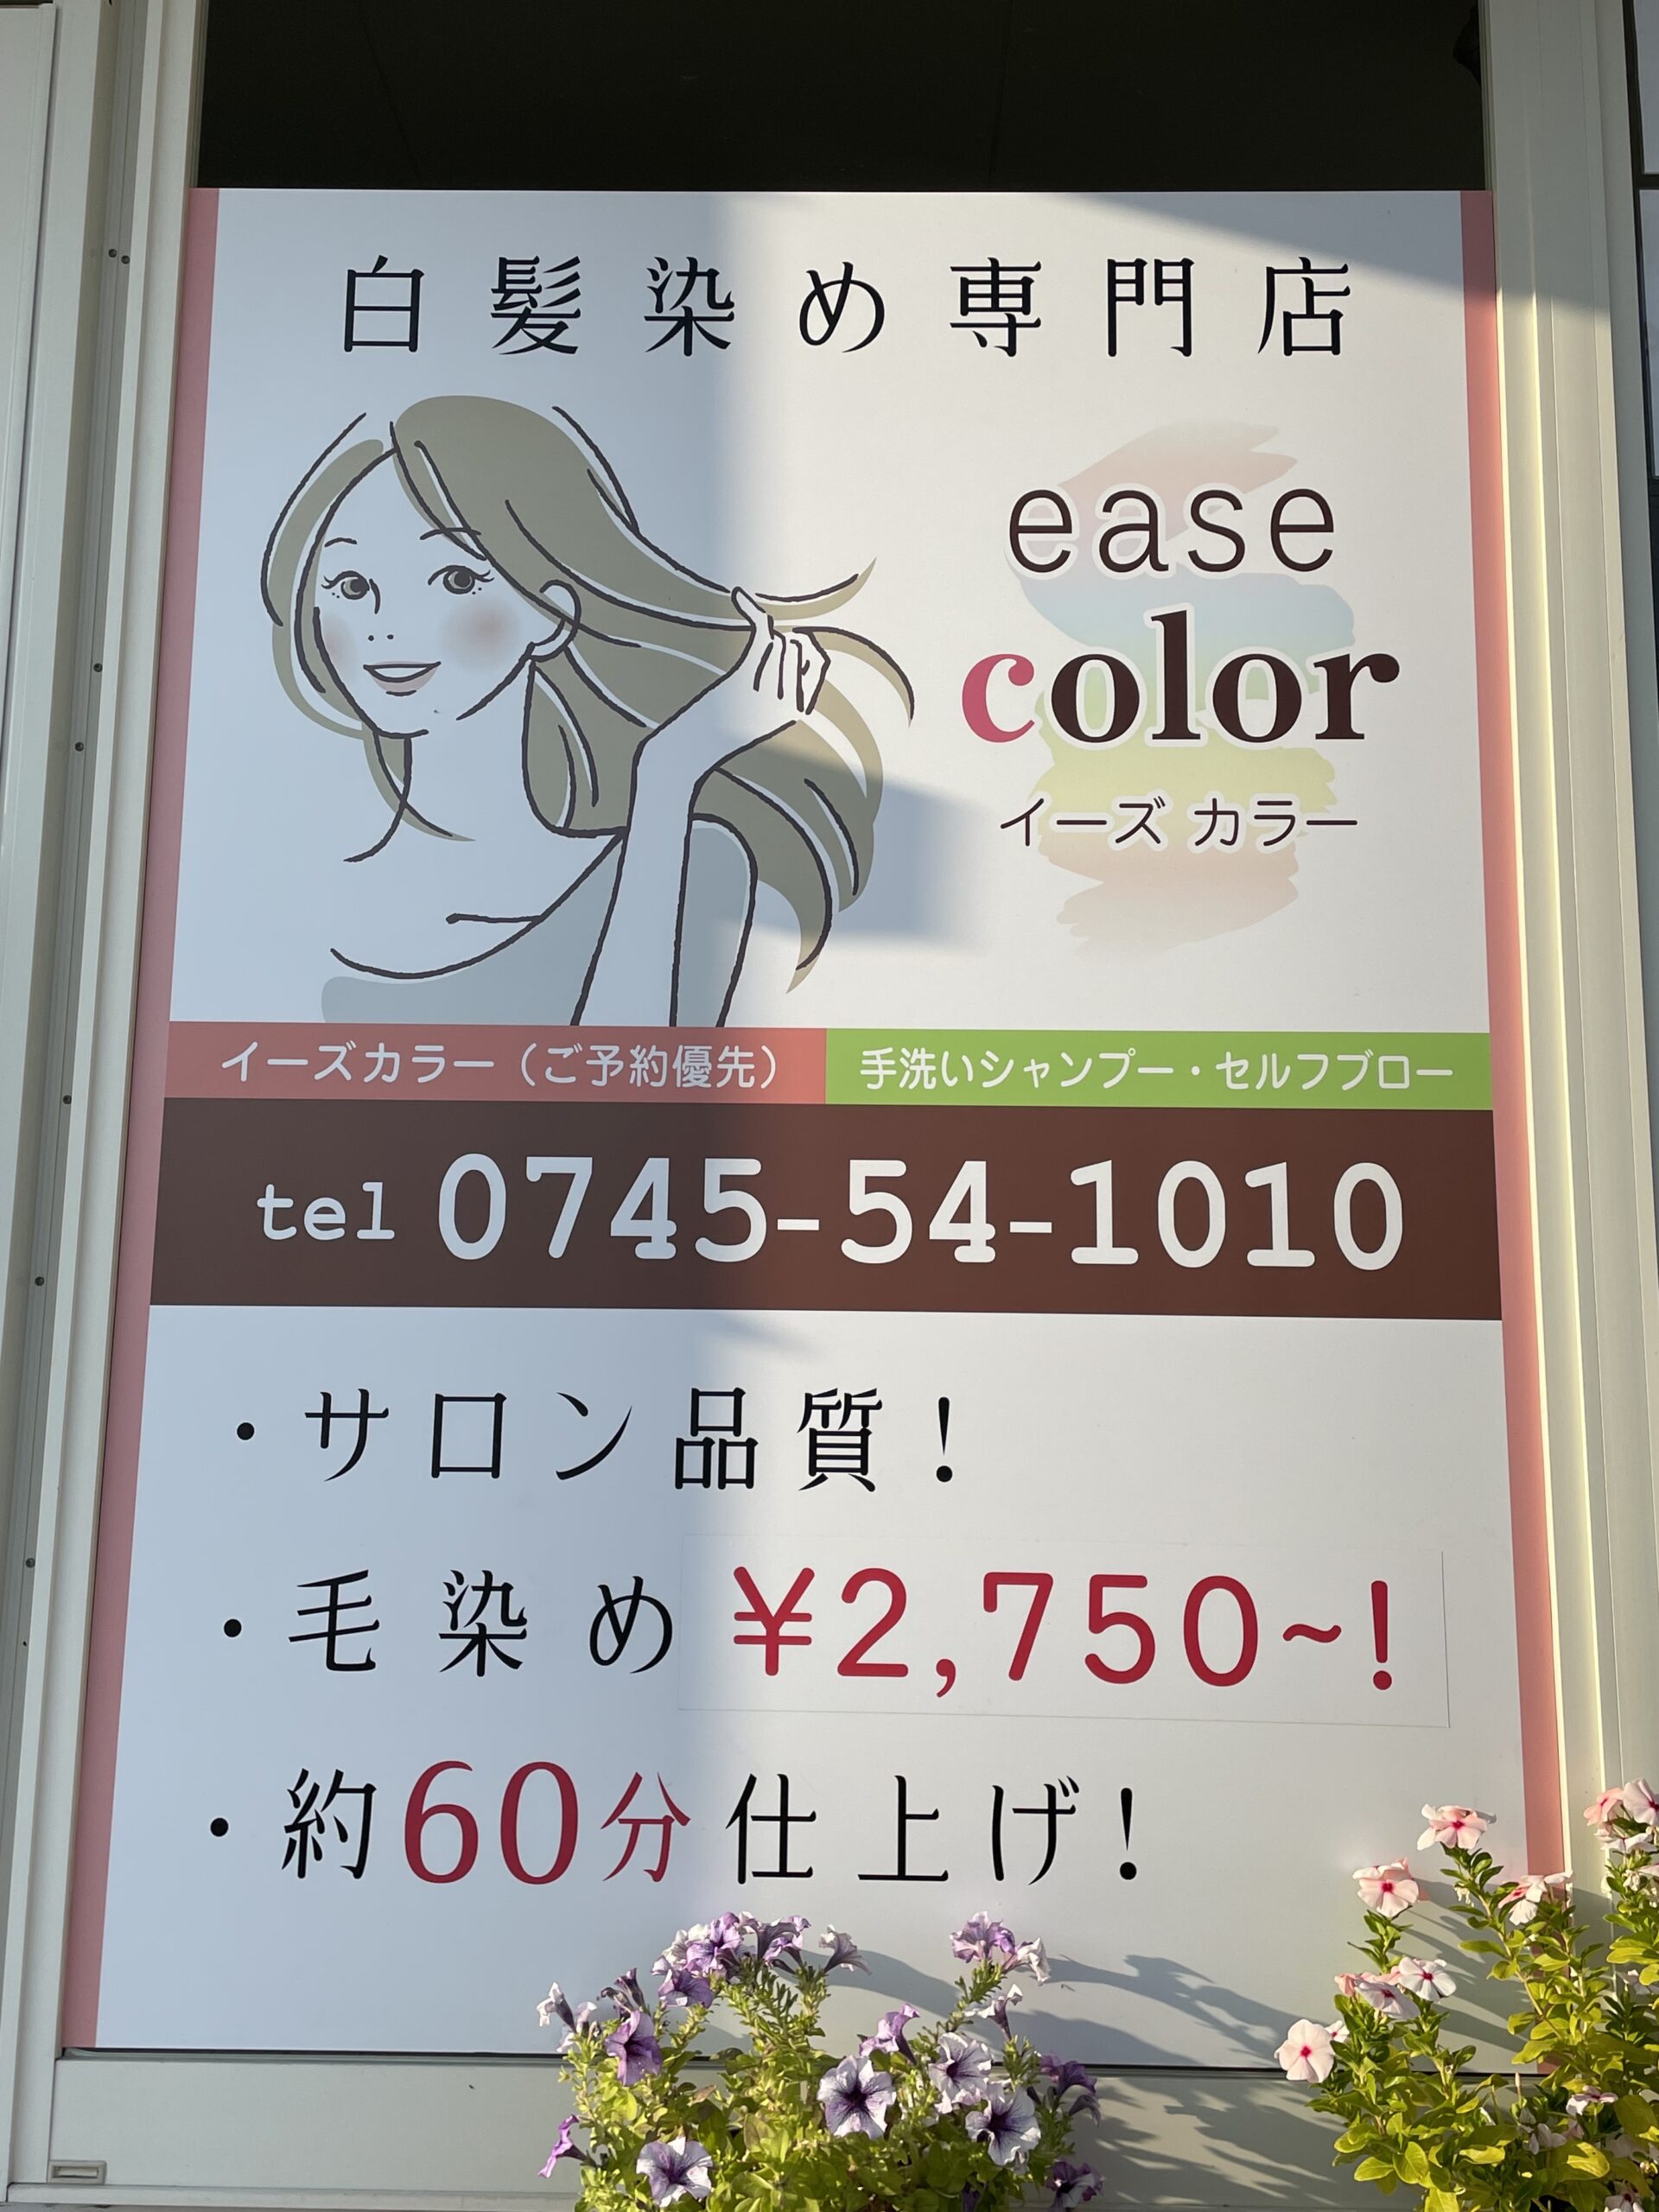 ease color 広陵店